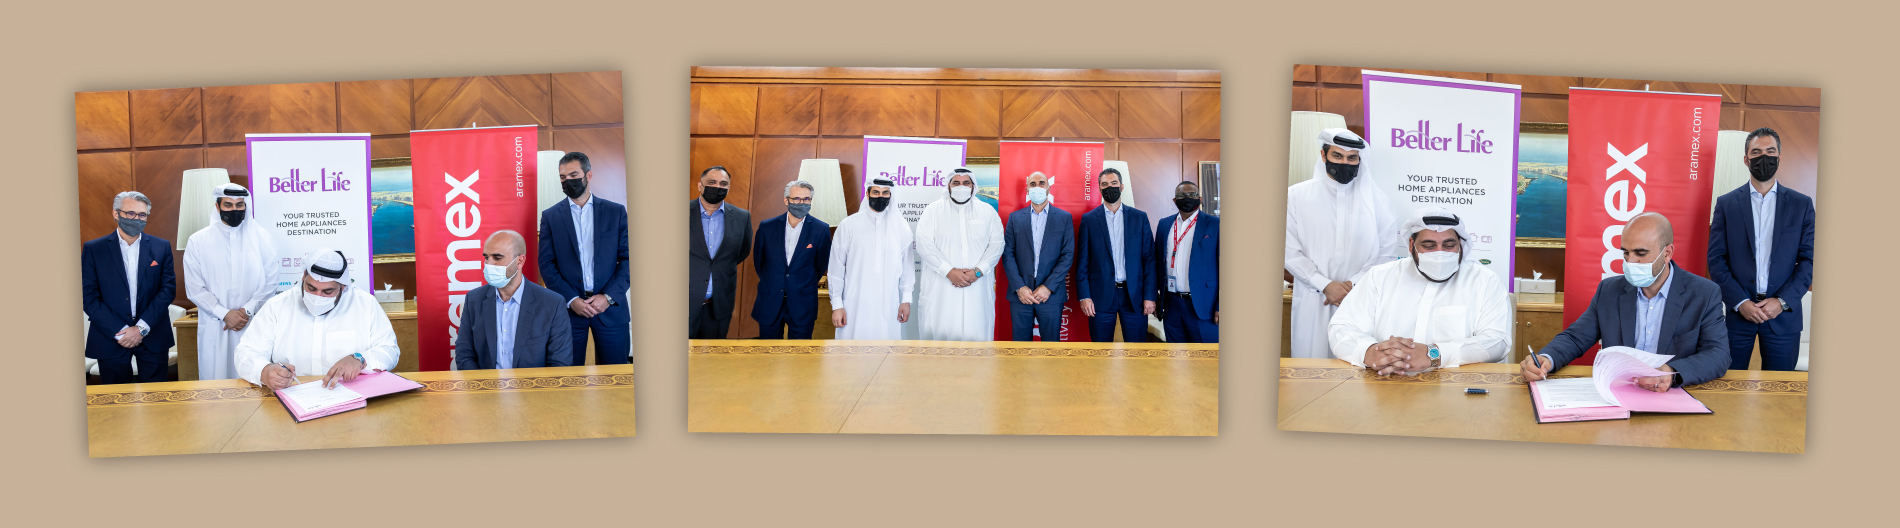 Better Life delivery agreement with Aramex to enhance customer experience